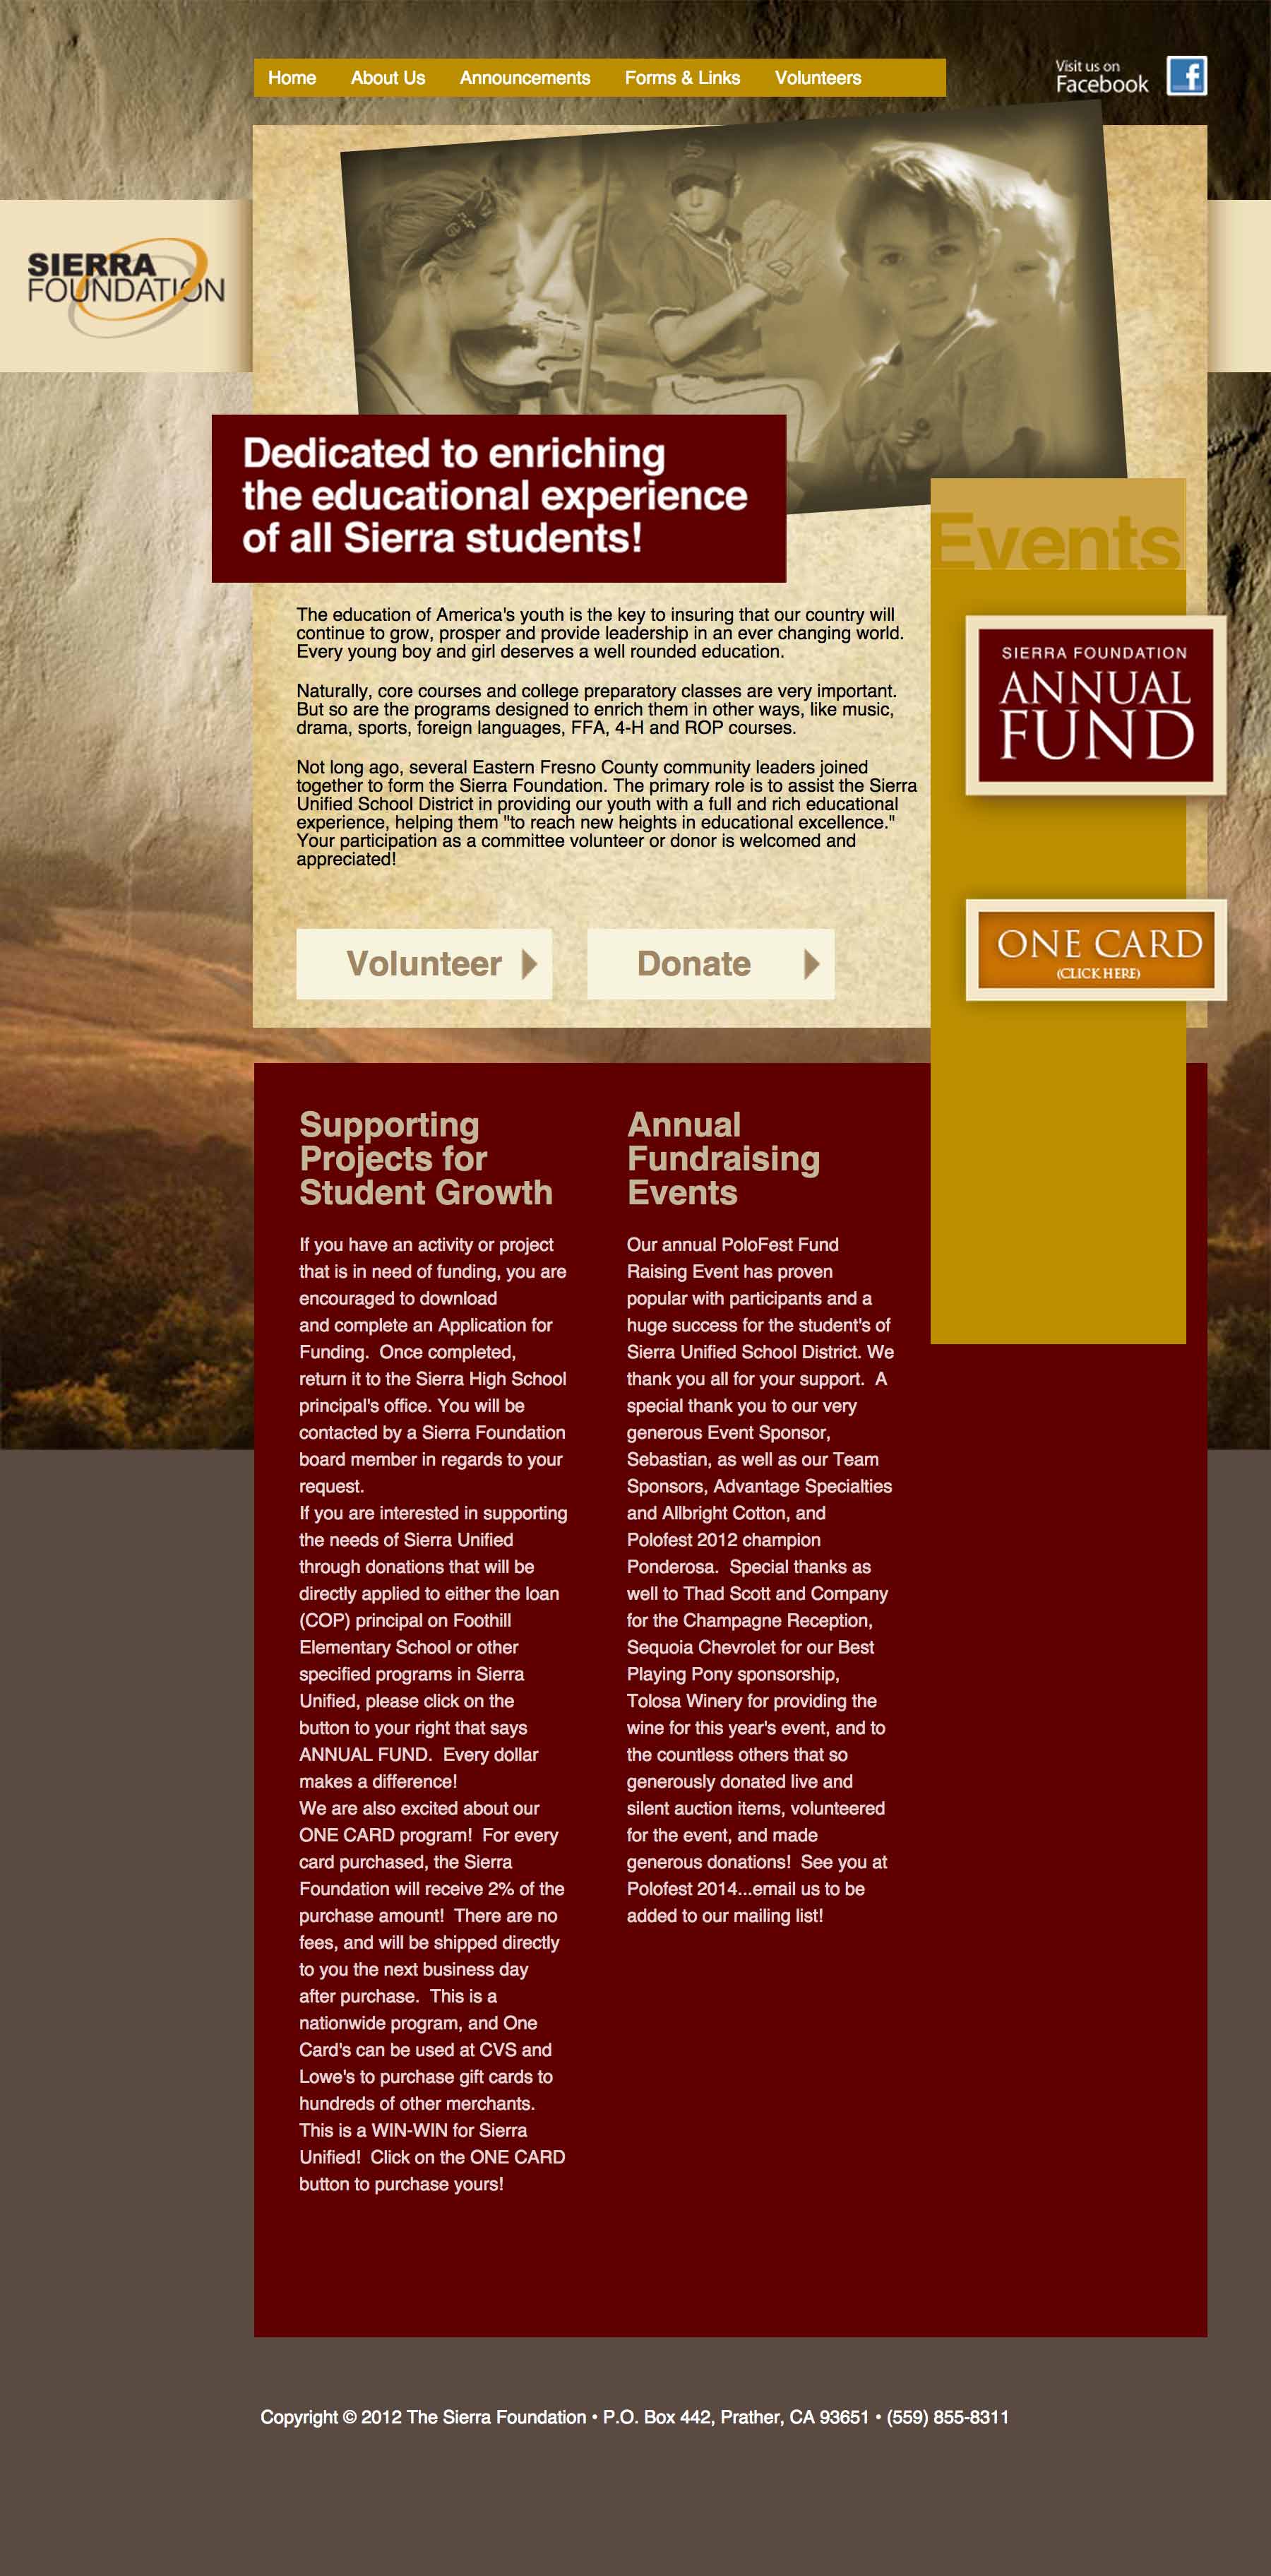 Screen shot of the The Sierra Foundation web site by Lee Powers.